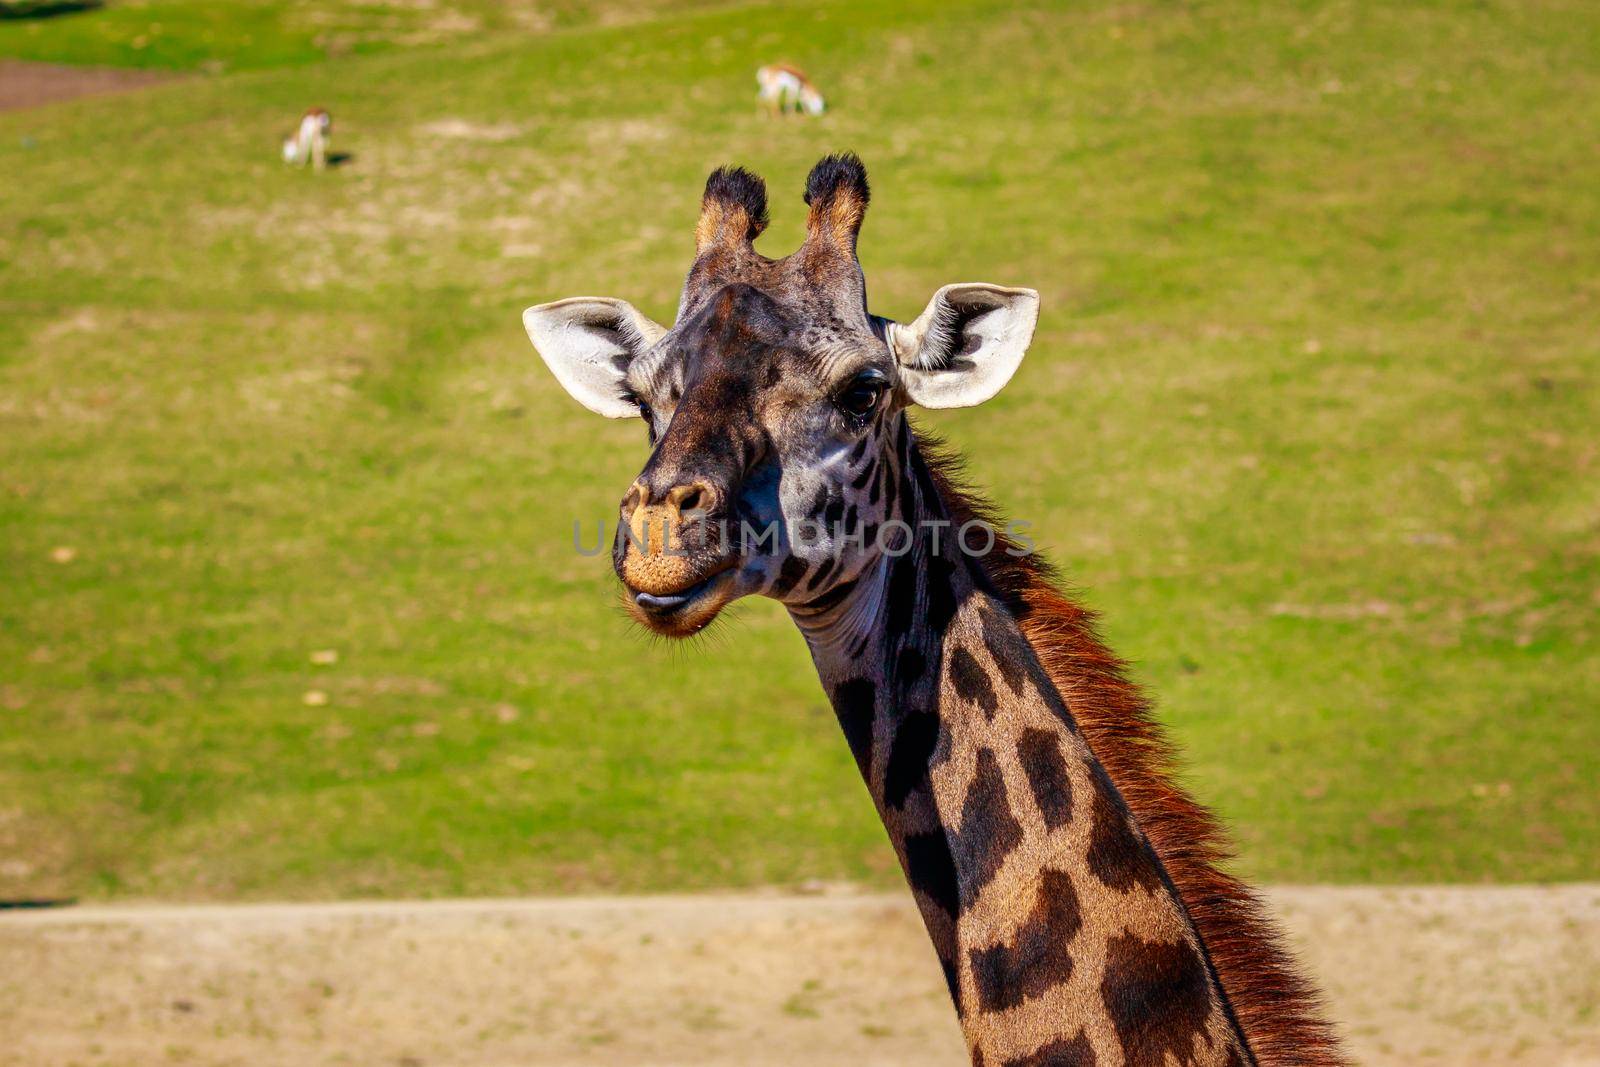 Close-up of a giraffe's head and upper neck, with tongue showing.